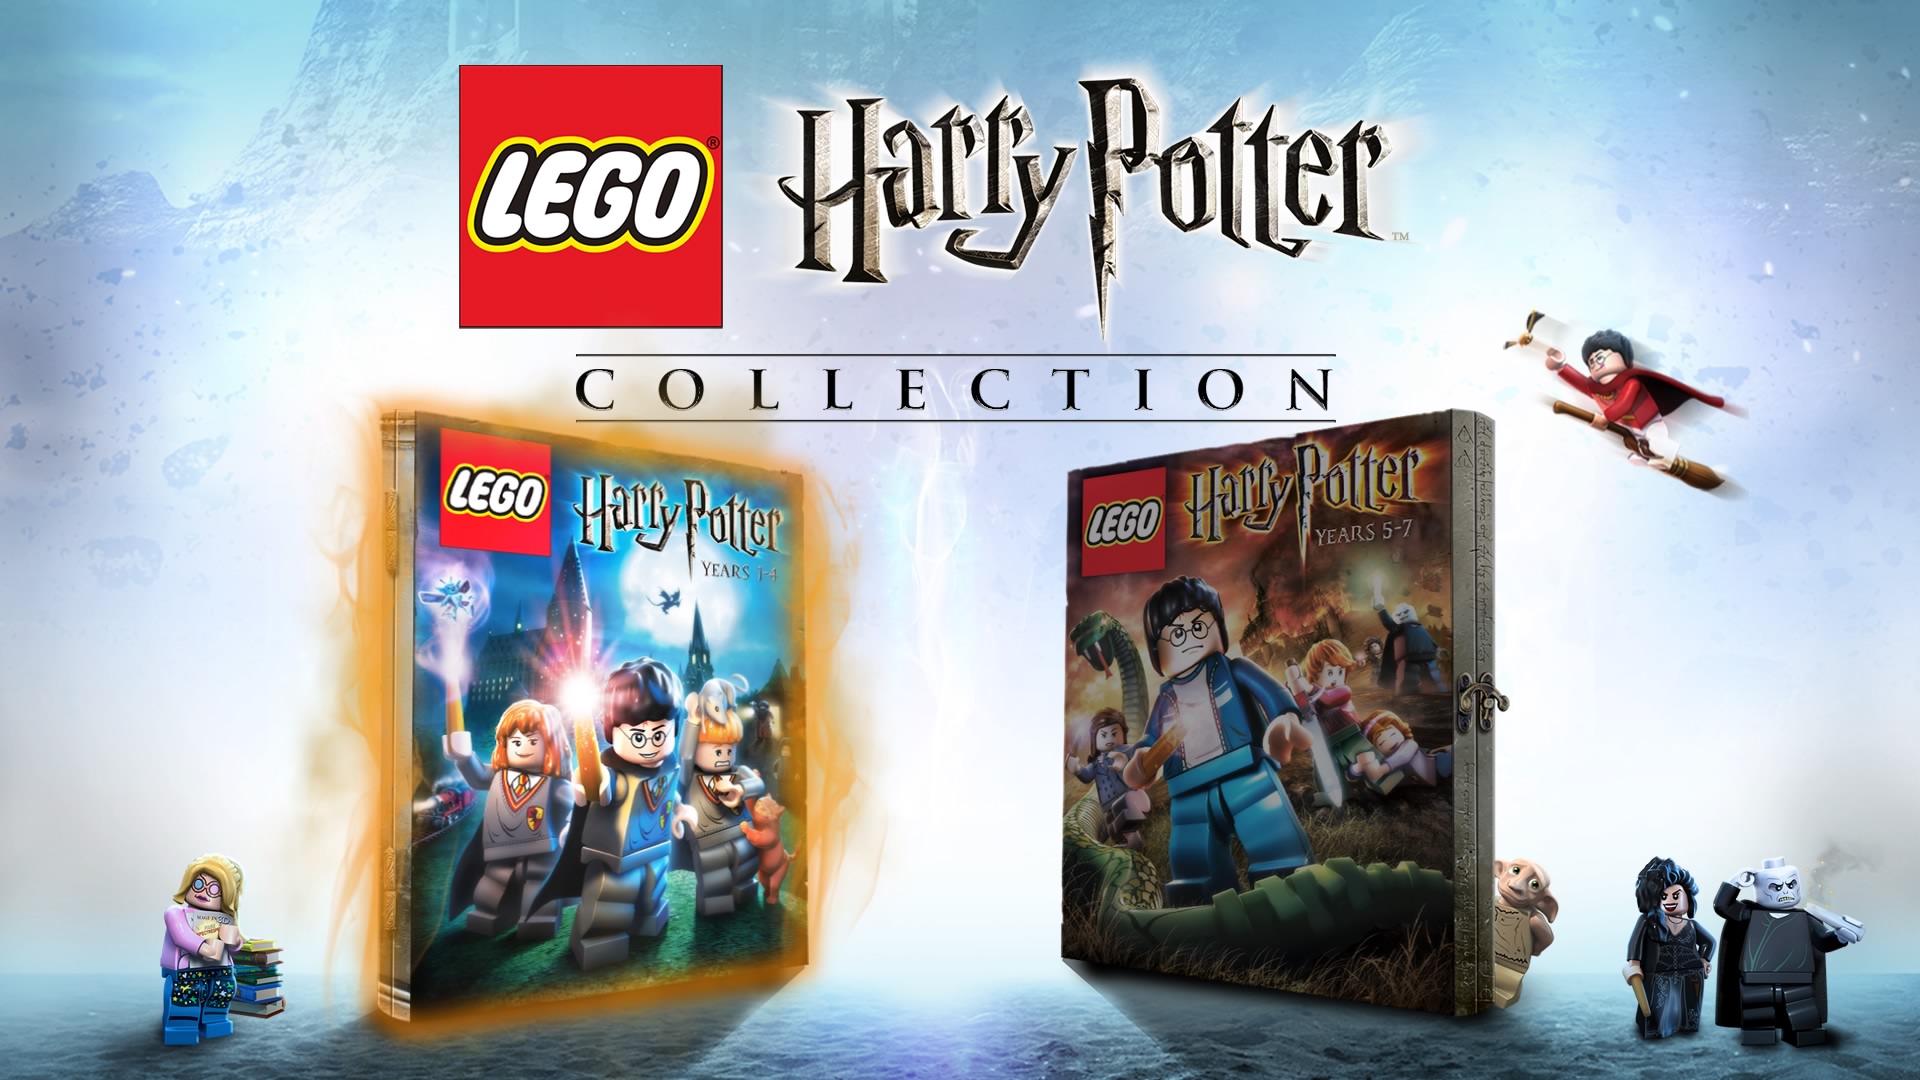 LEGO Harry Potter Review #1